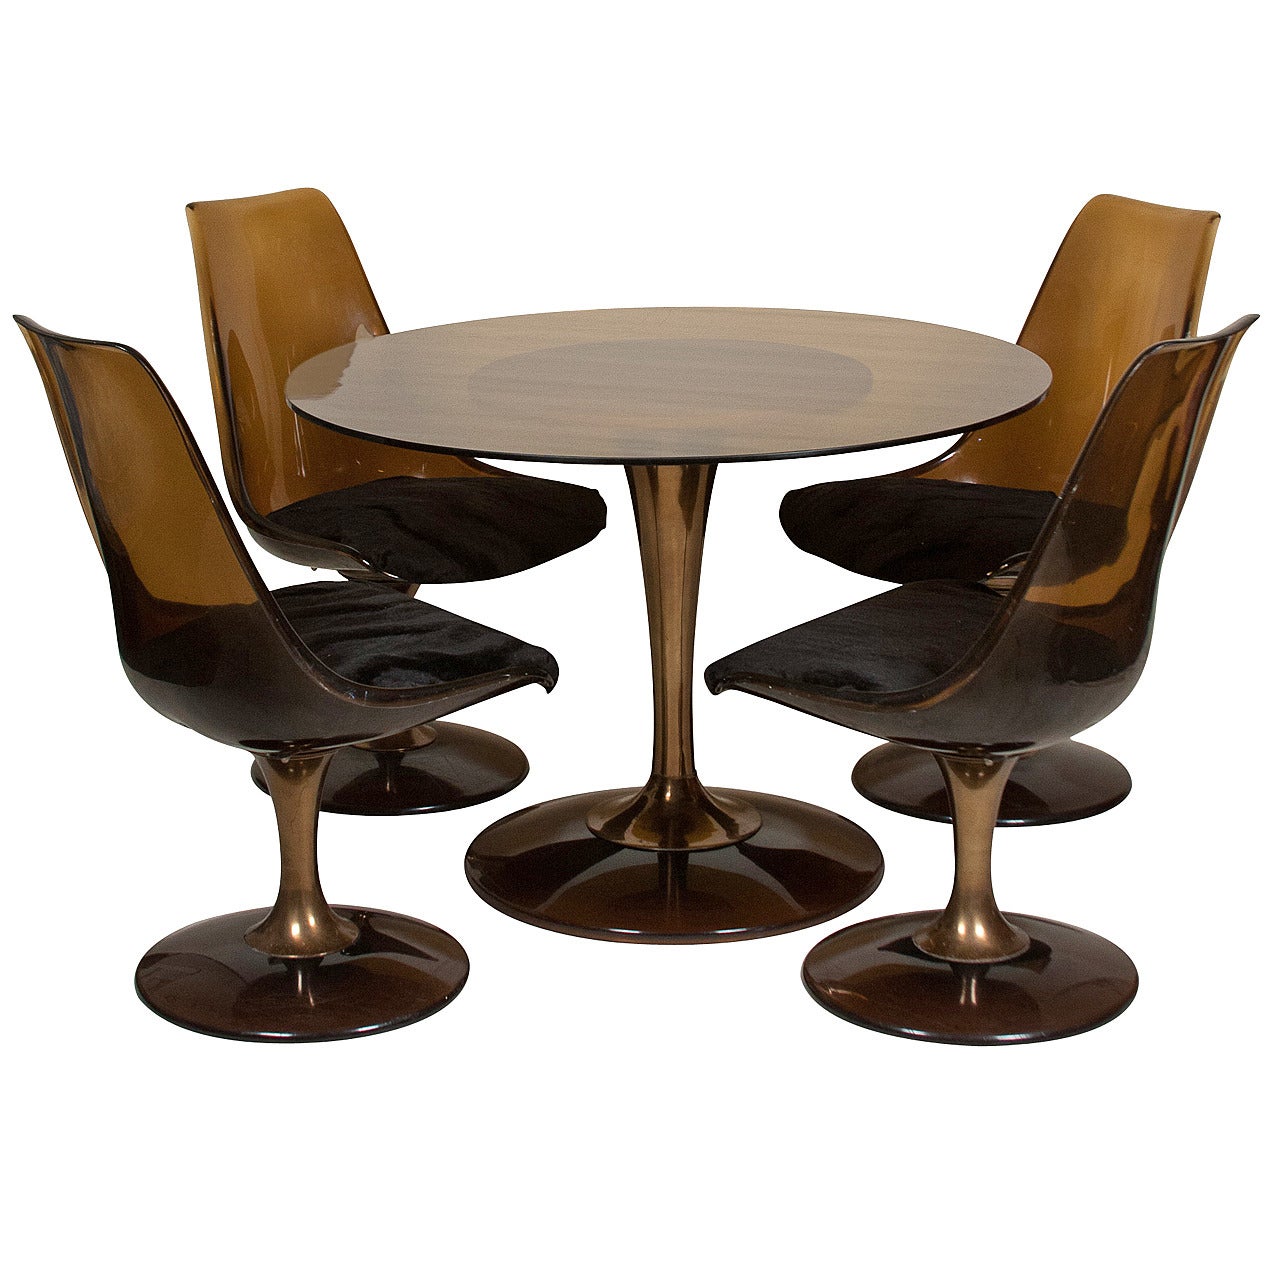 1970s Amber Glass-Top Tulip Dining Table and Chairs For Sale